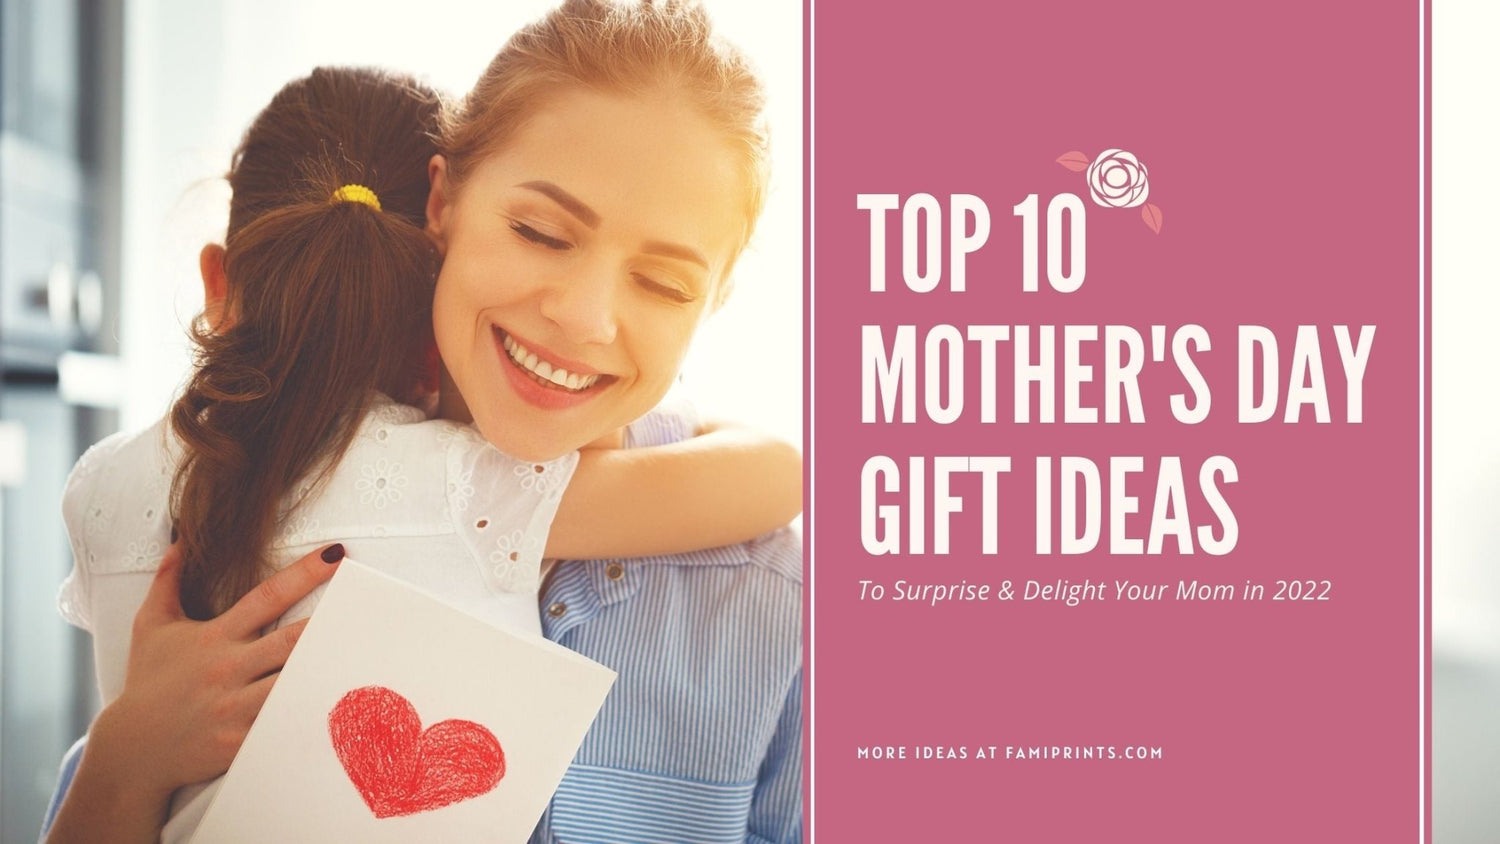 Top 10 Mother's Day Gift Ideas to Surprise & Delight Your Mom in 2022 (From $10) - FamiPrints | Trending Customizable Family Gifts